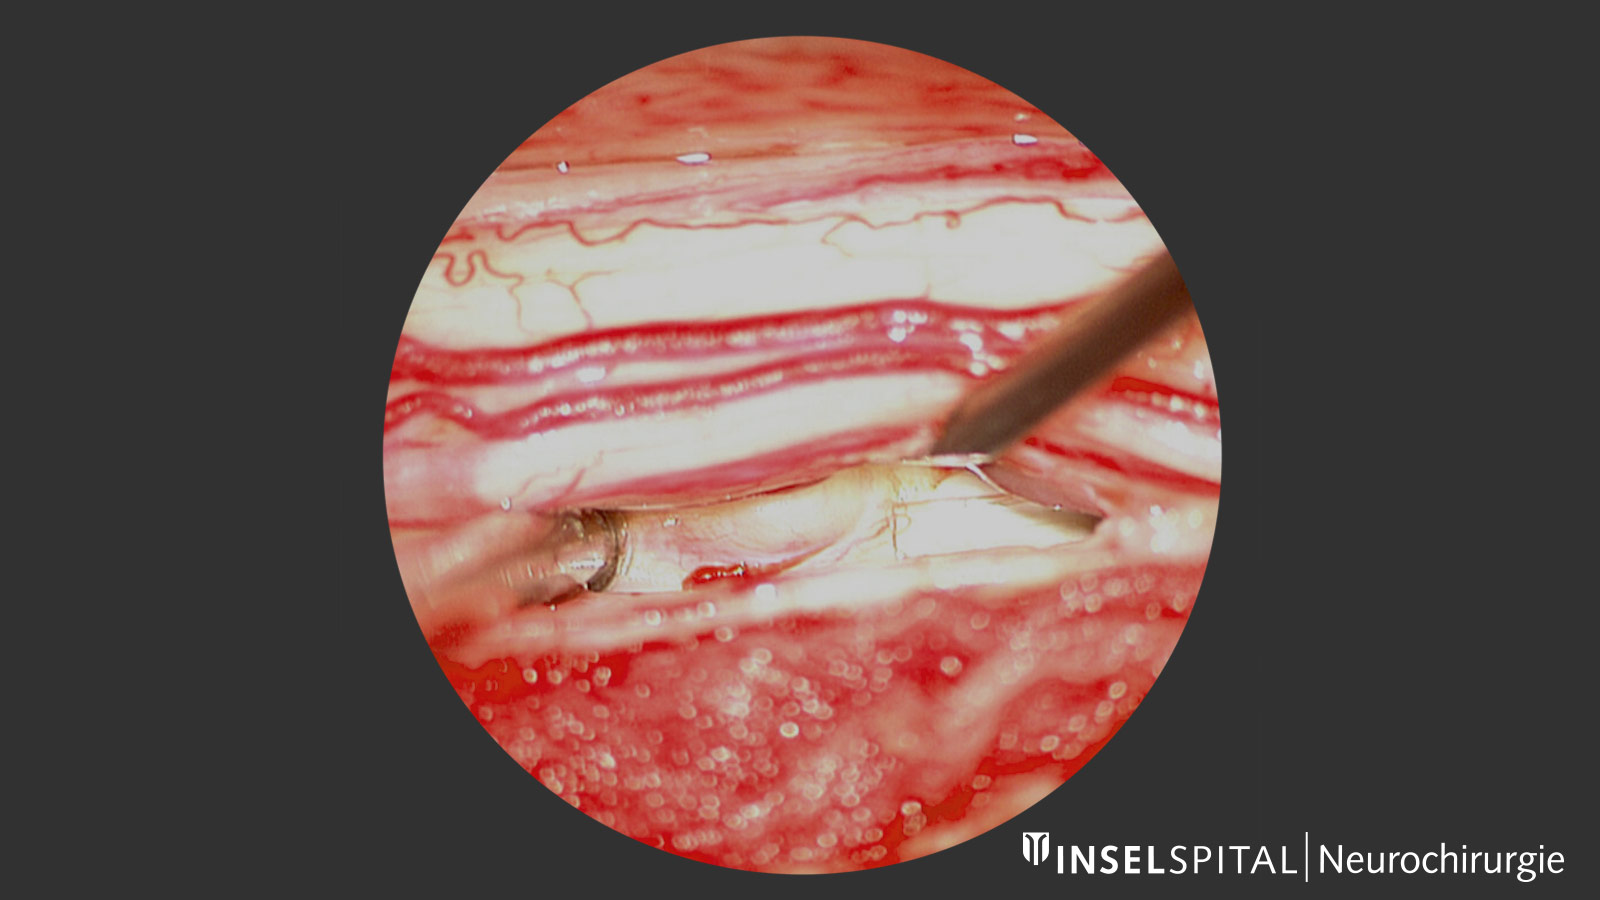 View through surgical microscope on spinal cord herniation